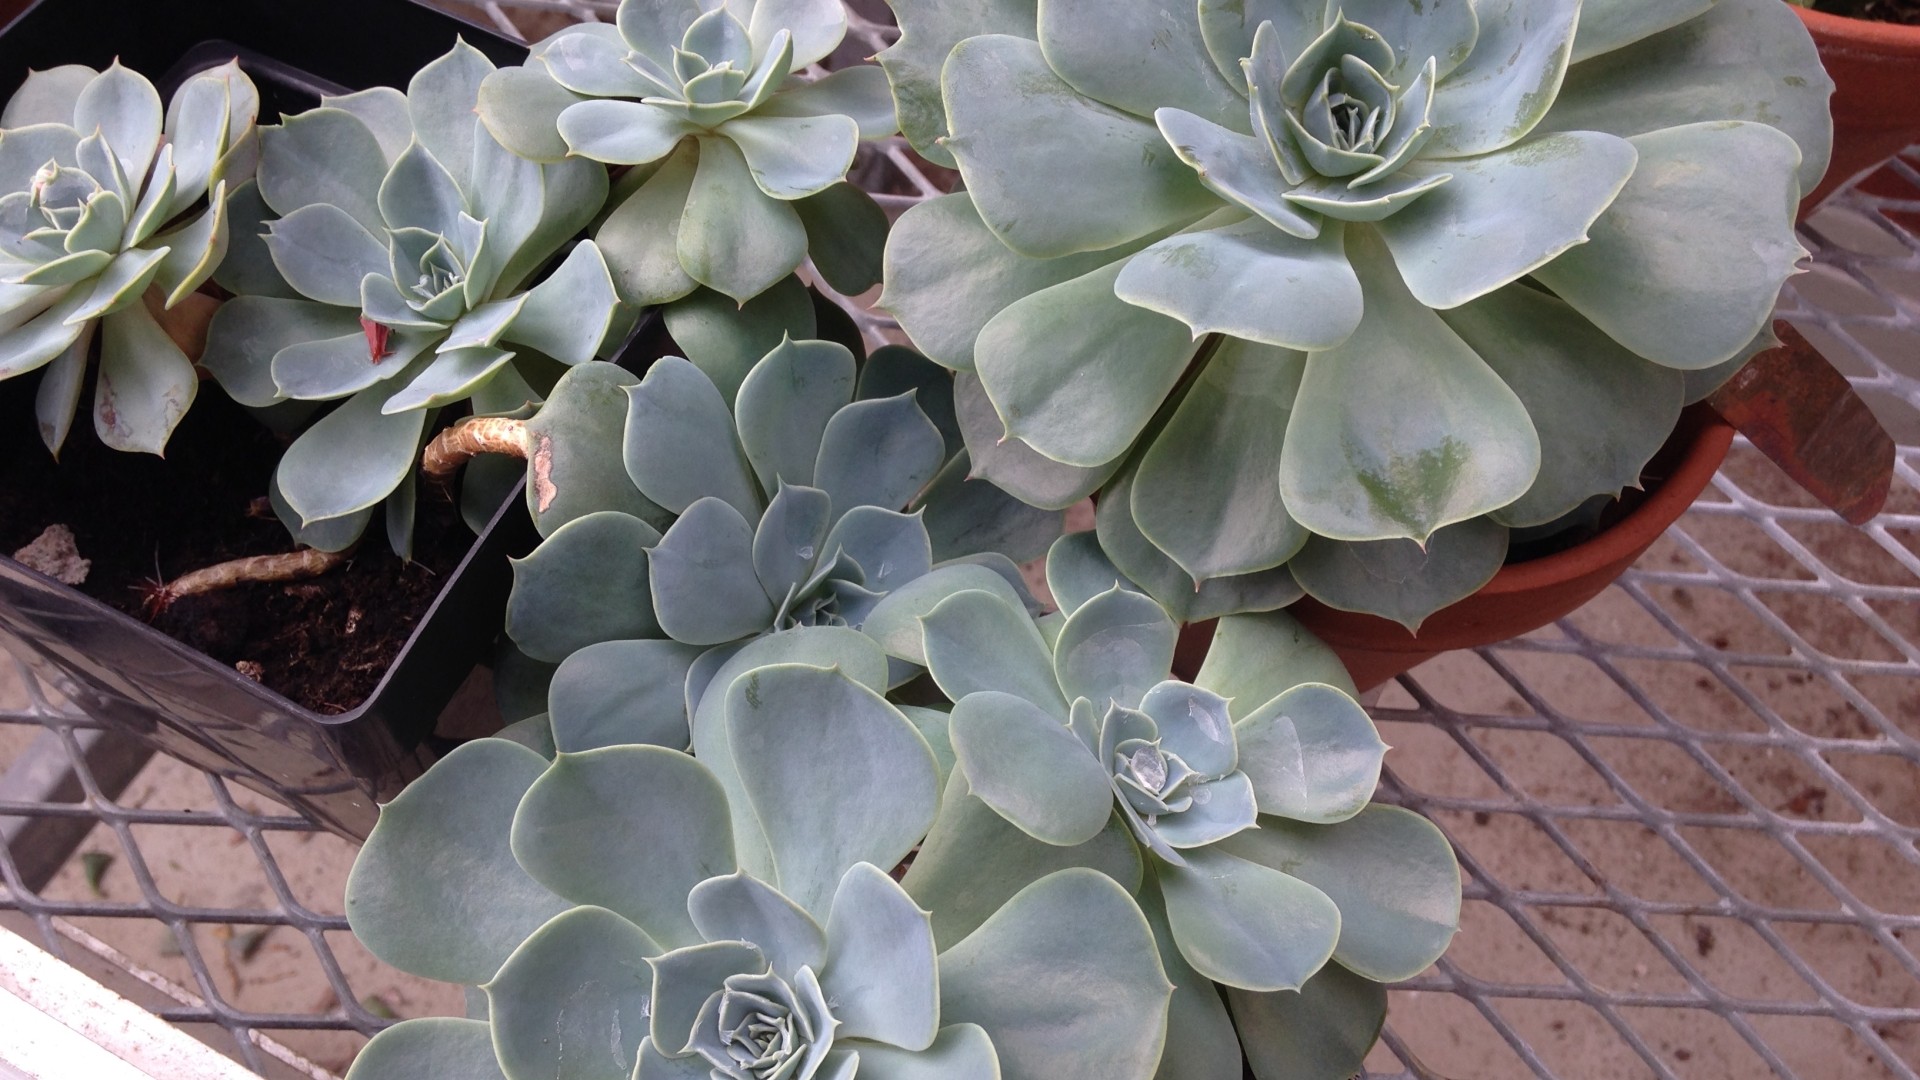 Succulent plants in the StFX Greenhouse